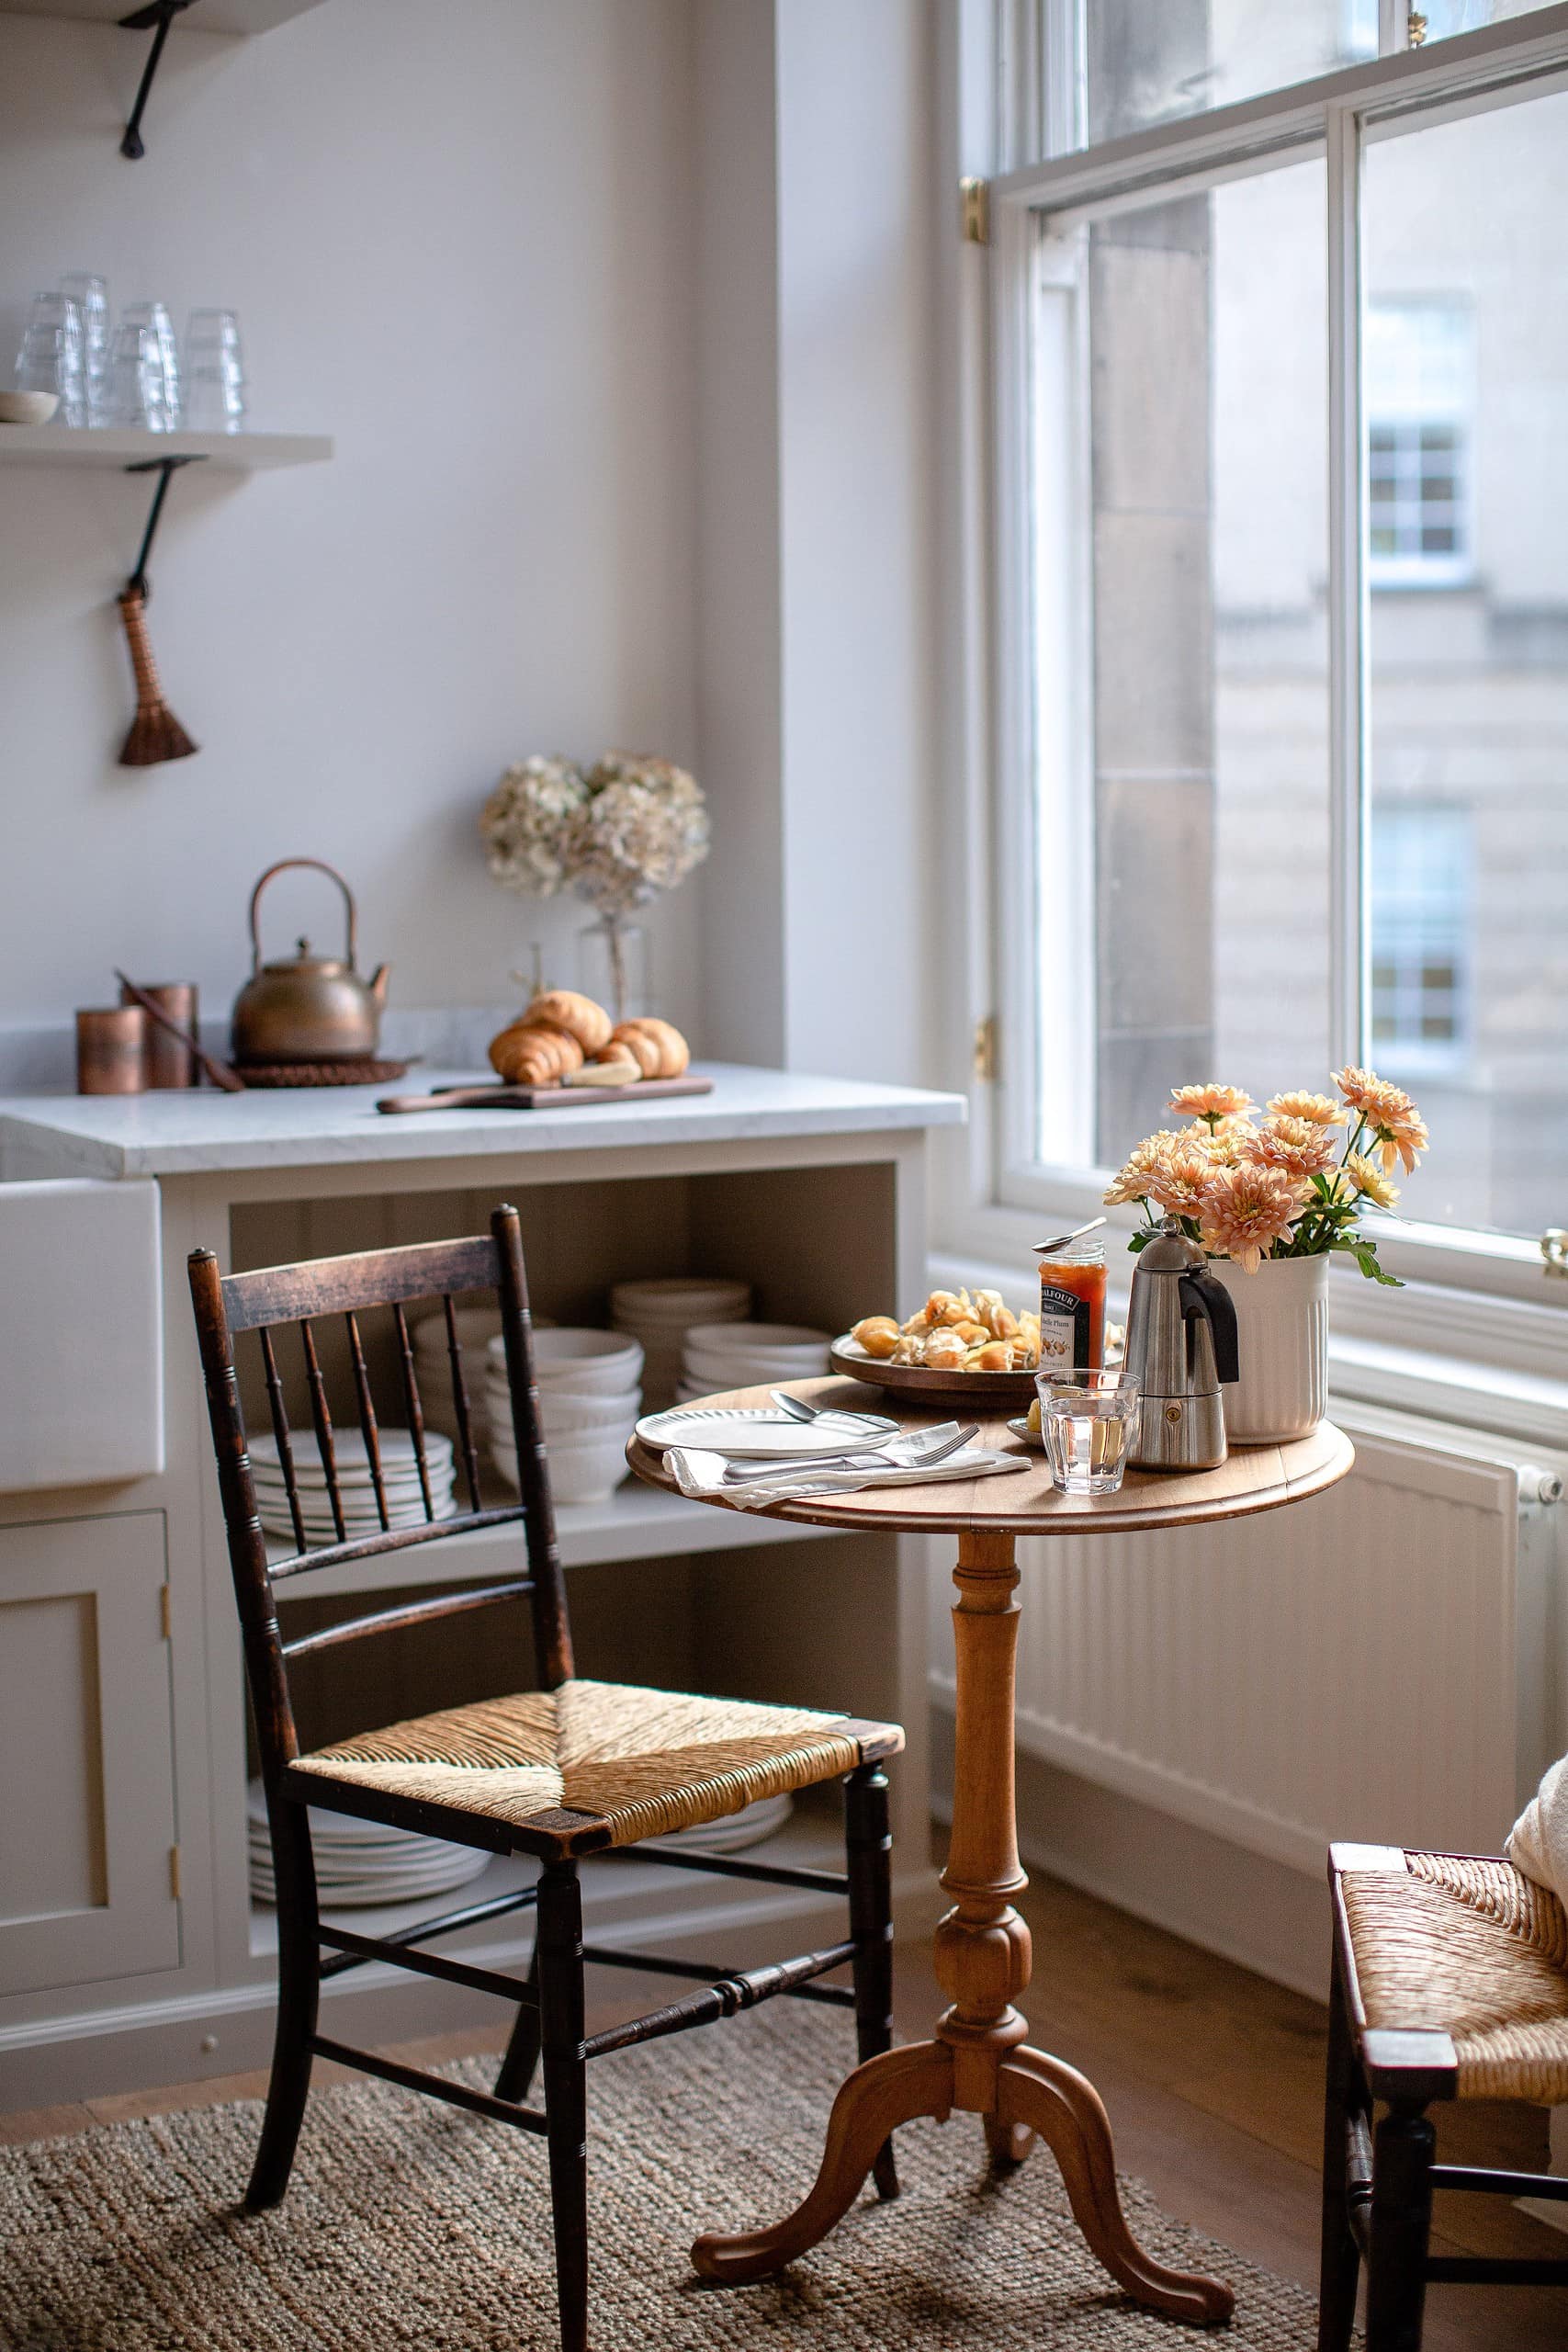 Kitchen room featuring windows and small bistro table as an example of Style Small Space Ideas